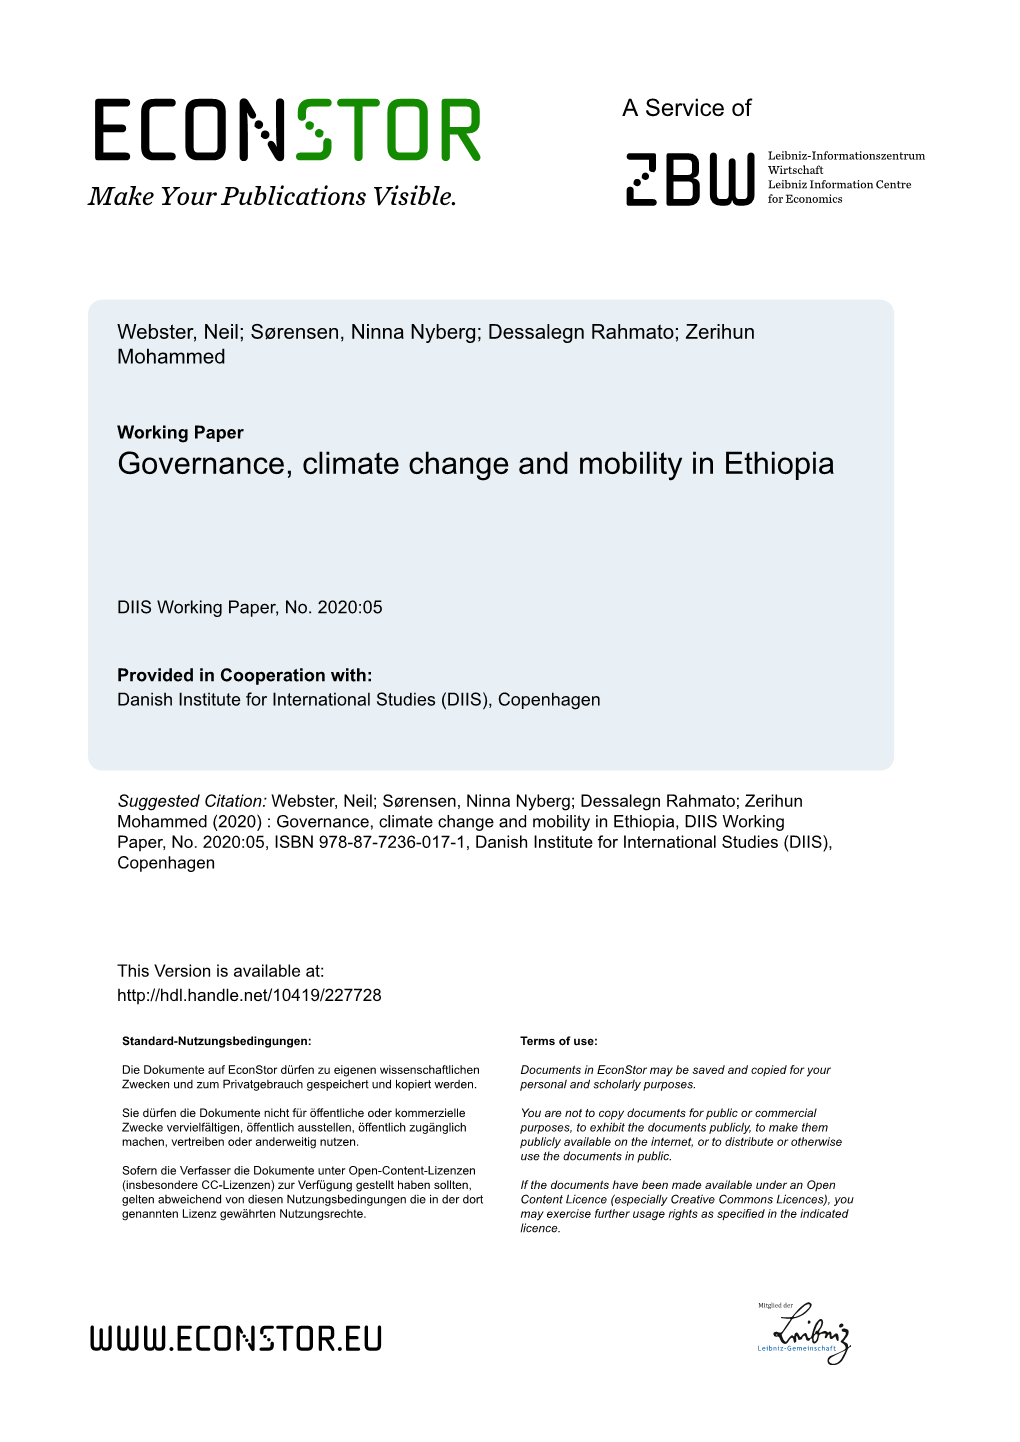 Governance, Climate Change and Mobility in Ethiopia